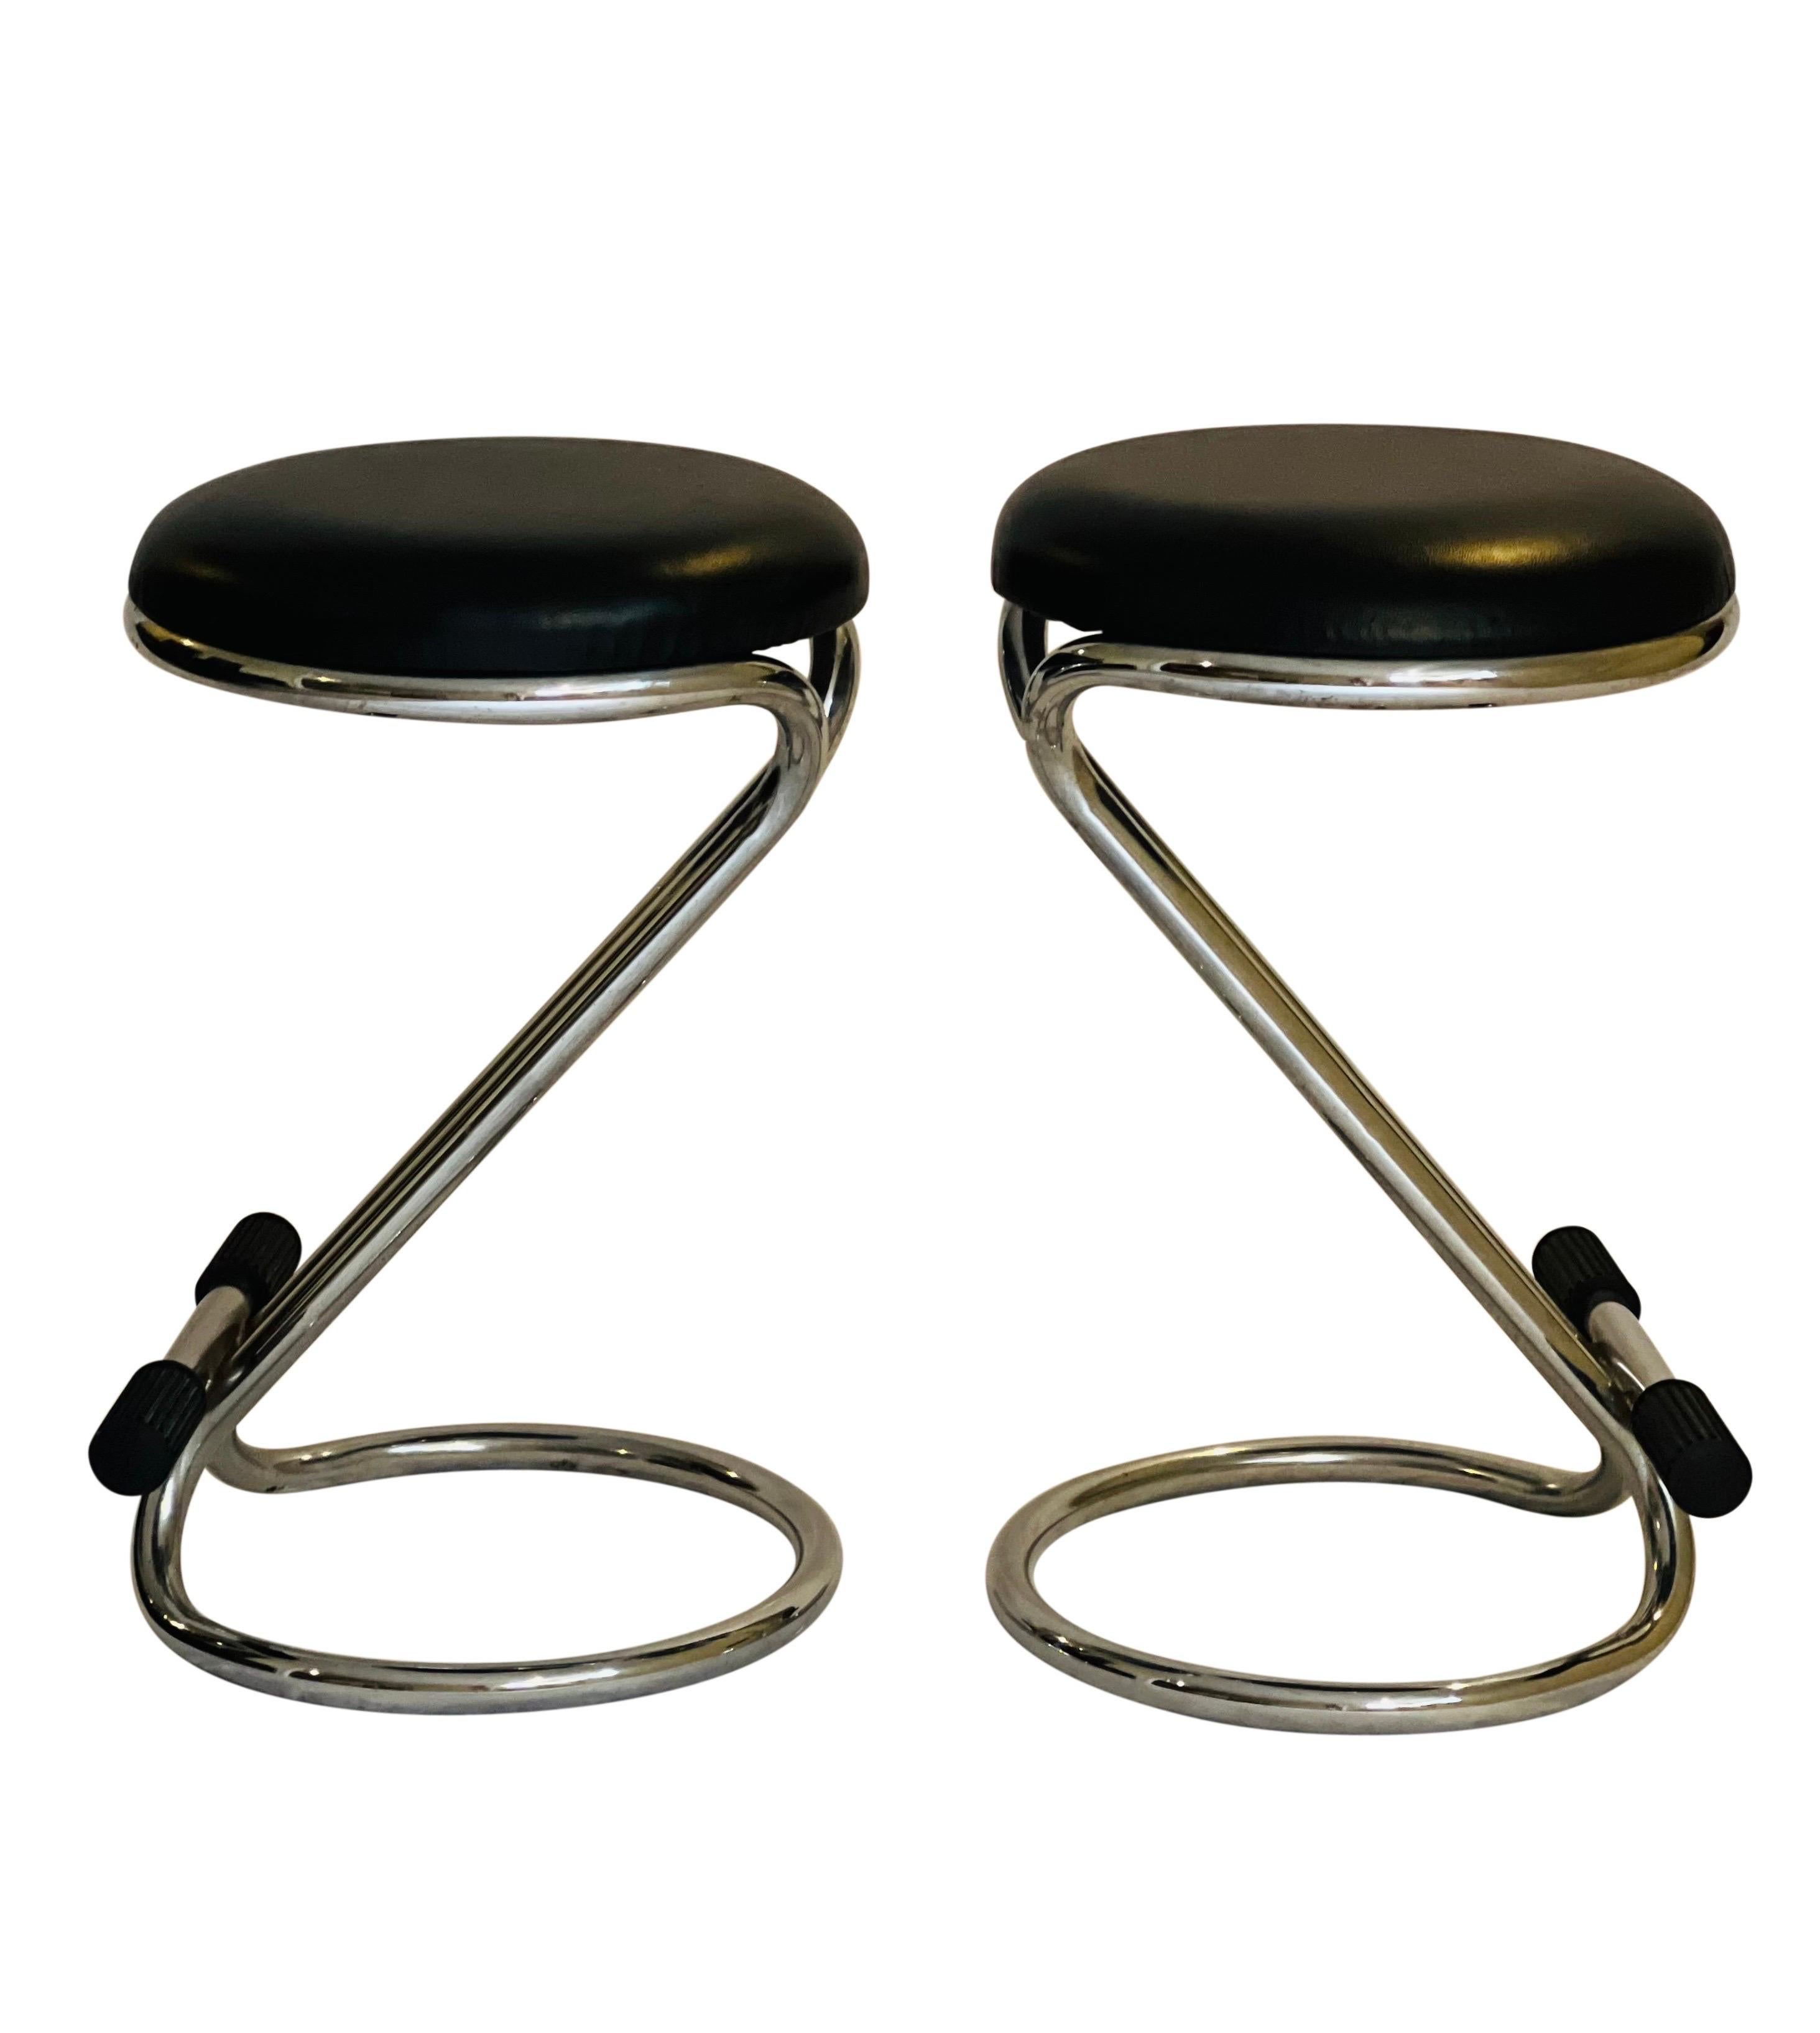 Exceptional pair of Italian tubular chrome counter height stools with Z base frame by Bieffeplast, Padova.

Stools feature a nicely cushioned, ample faux leather seat with a comfortable, thickly texturized rubber footrest. The stools are expertly